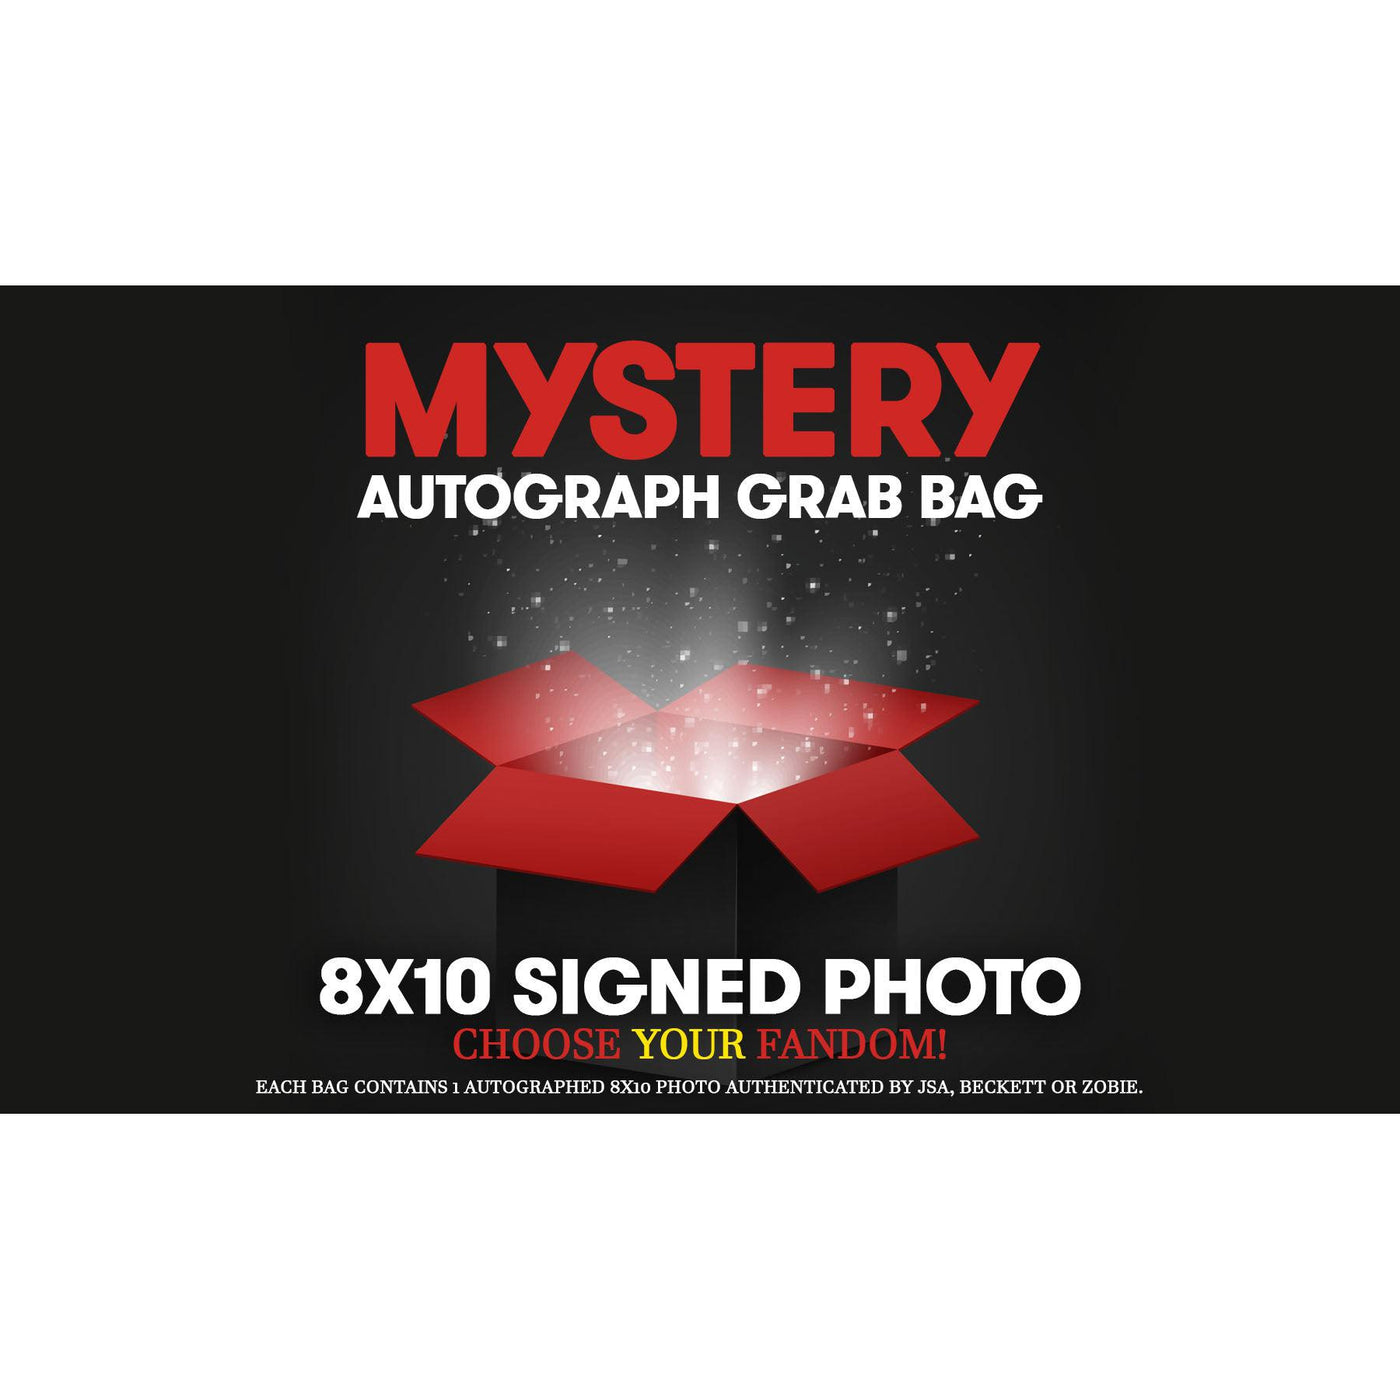 Add a Mystery 8x10 Autographed Photo Grab Bag